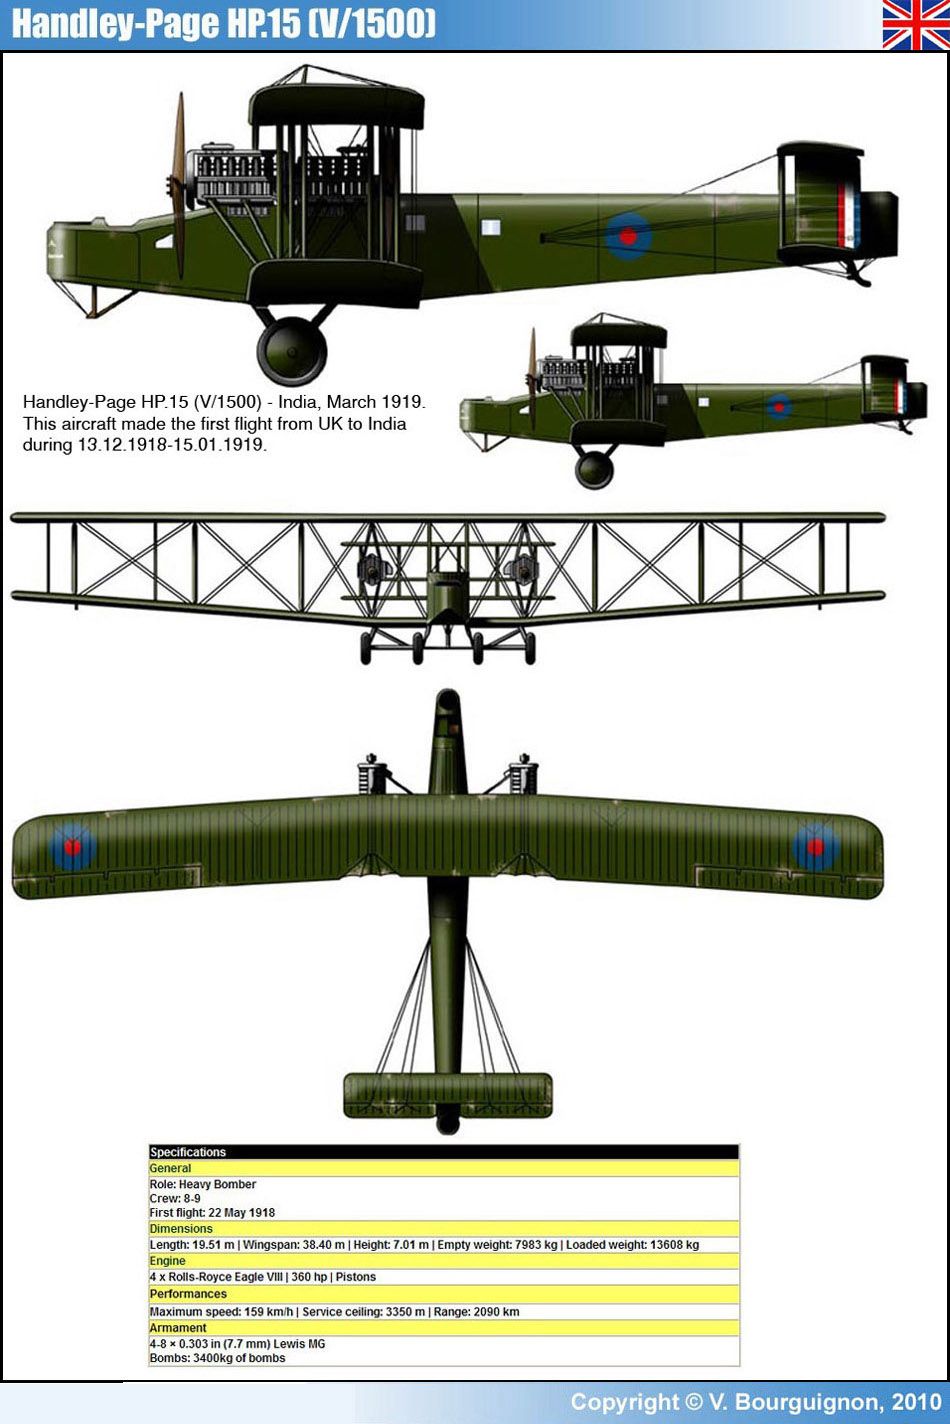 Handley-Page H.P.15